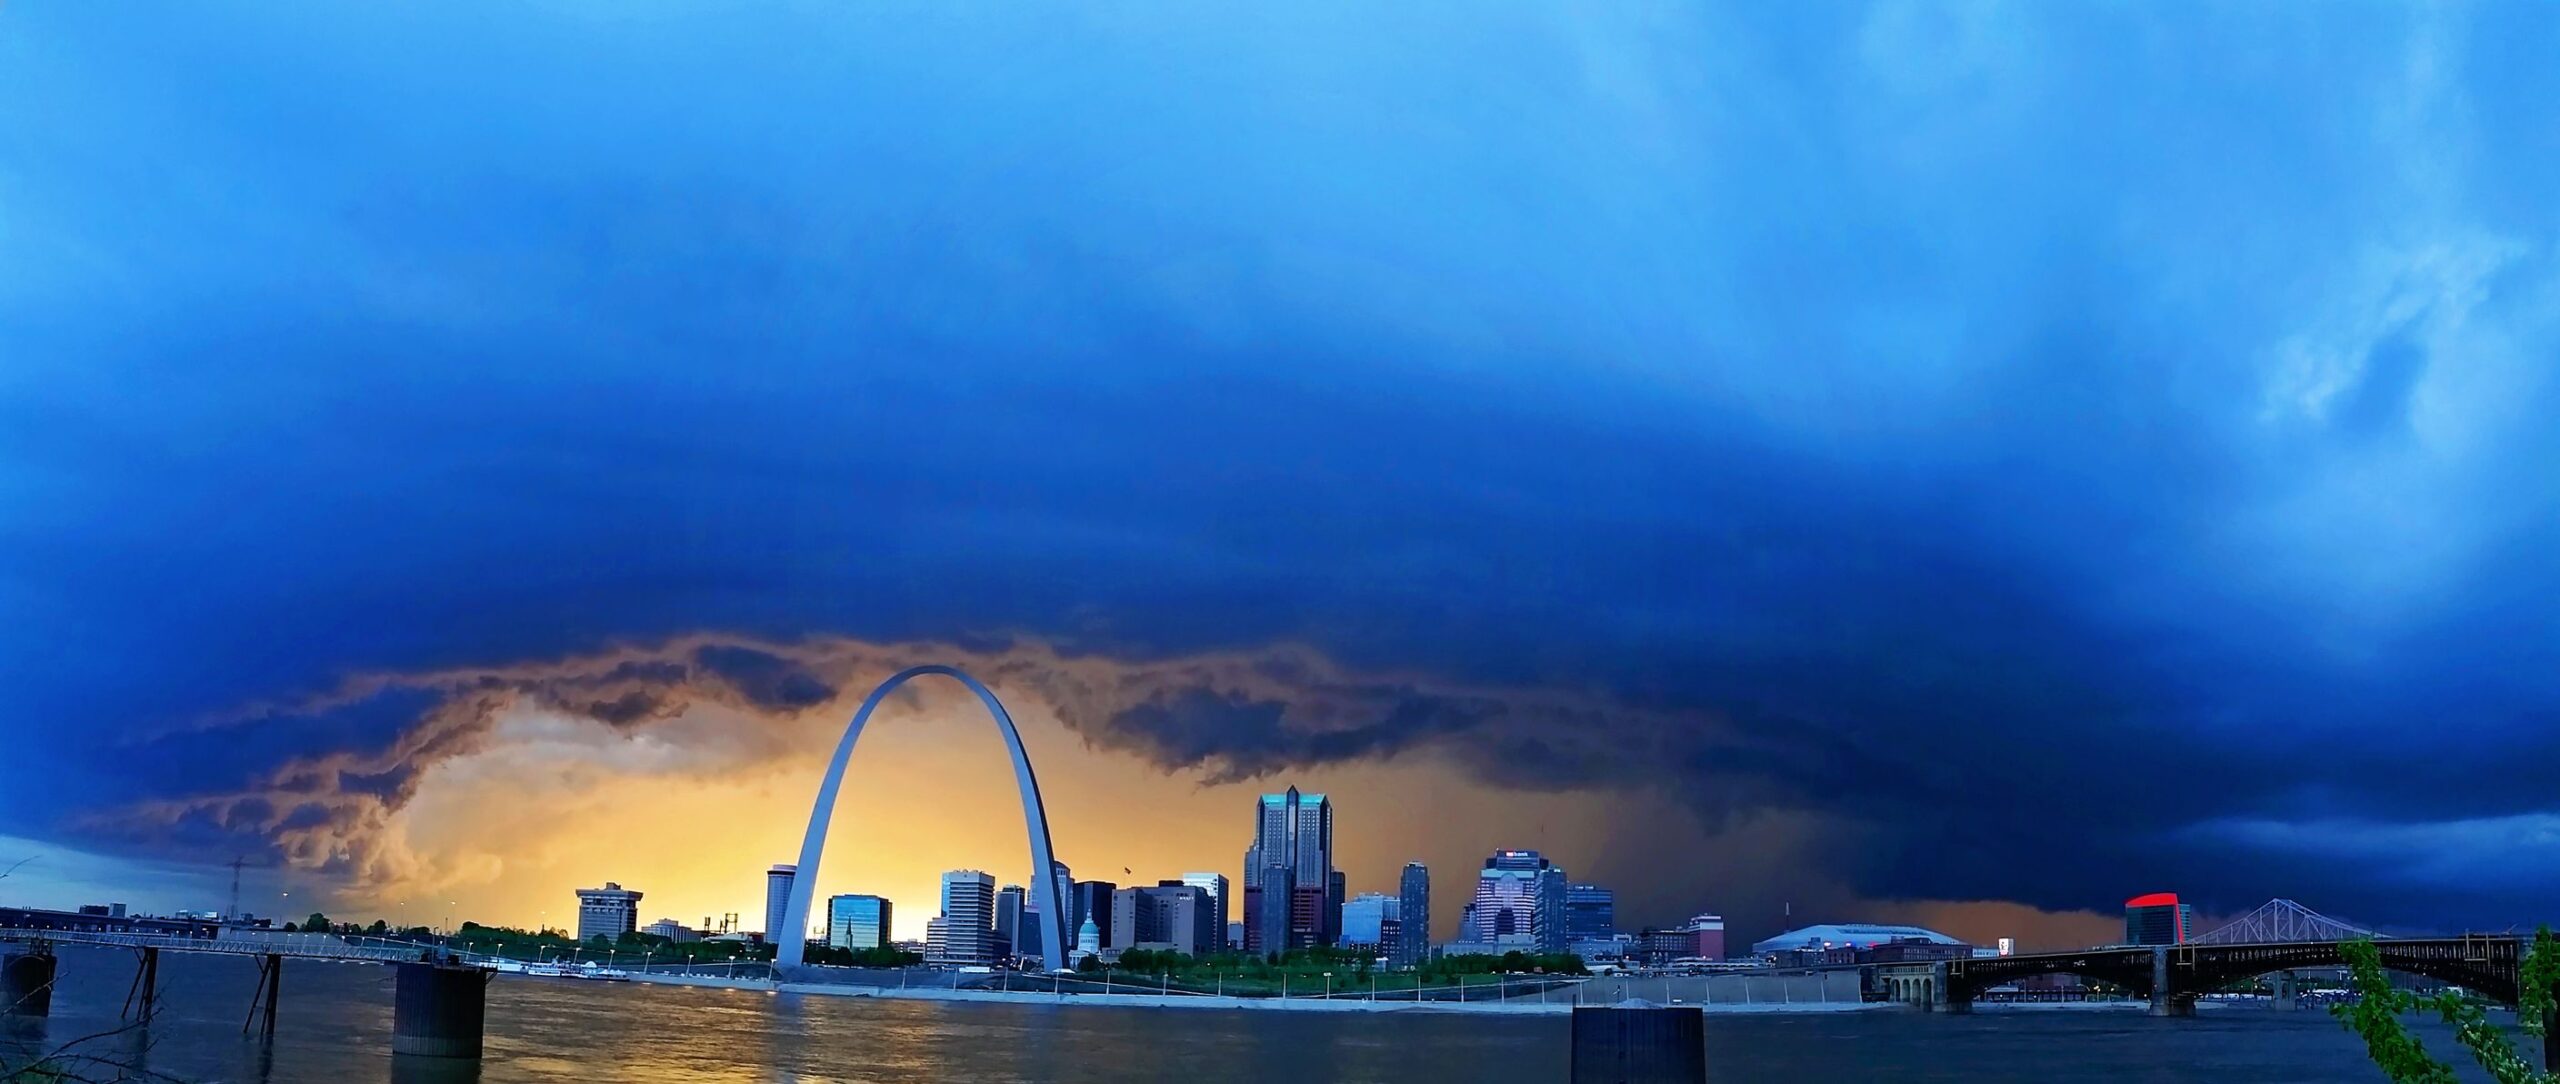 A Shelf Cloud approches downtown St. Louis as seen from the Illinois side of the Mississippi River